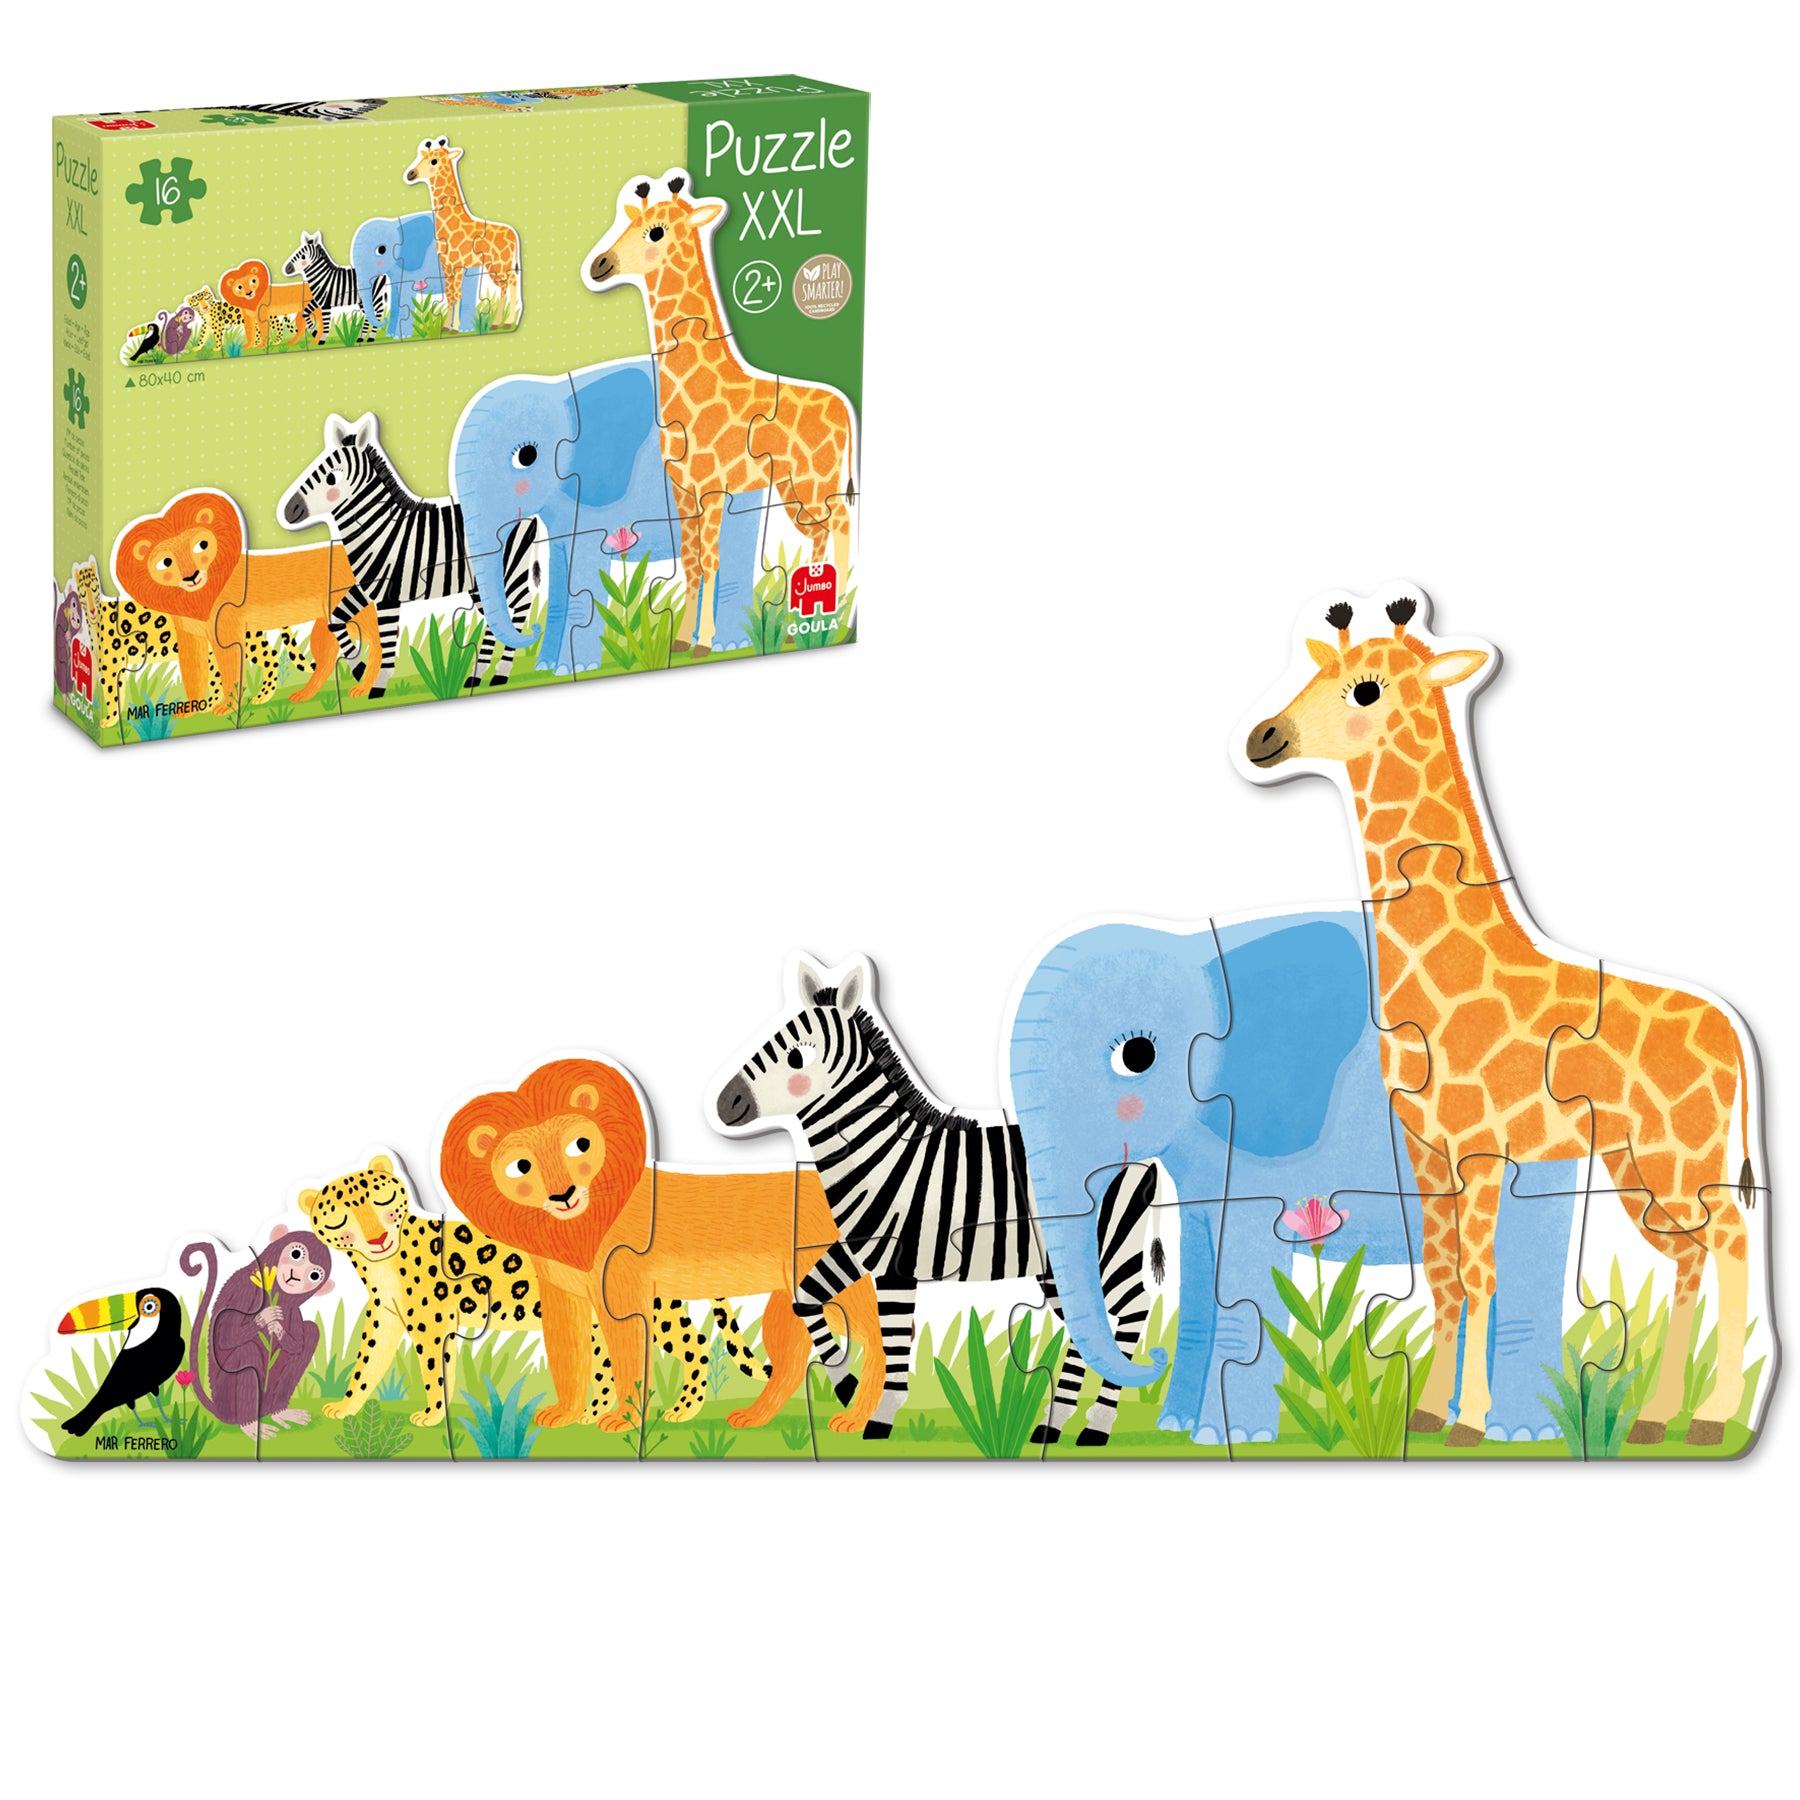 Puzzle XXL Jungle from small to large - product image - Jumboplay.com